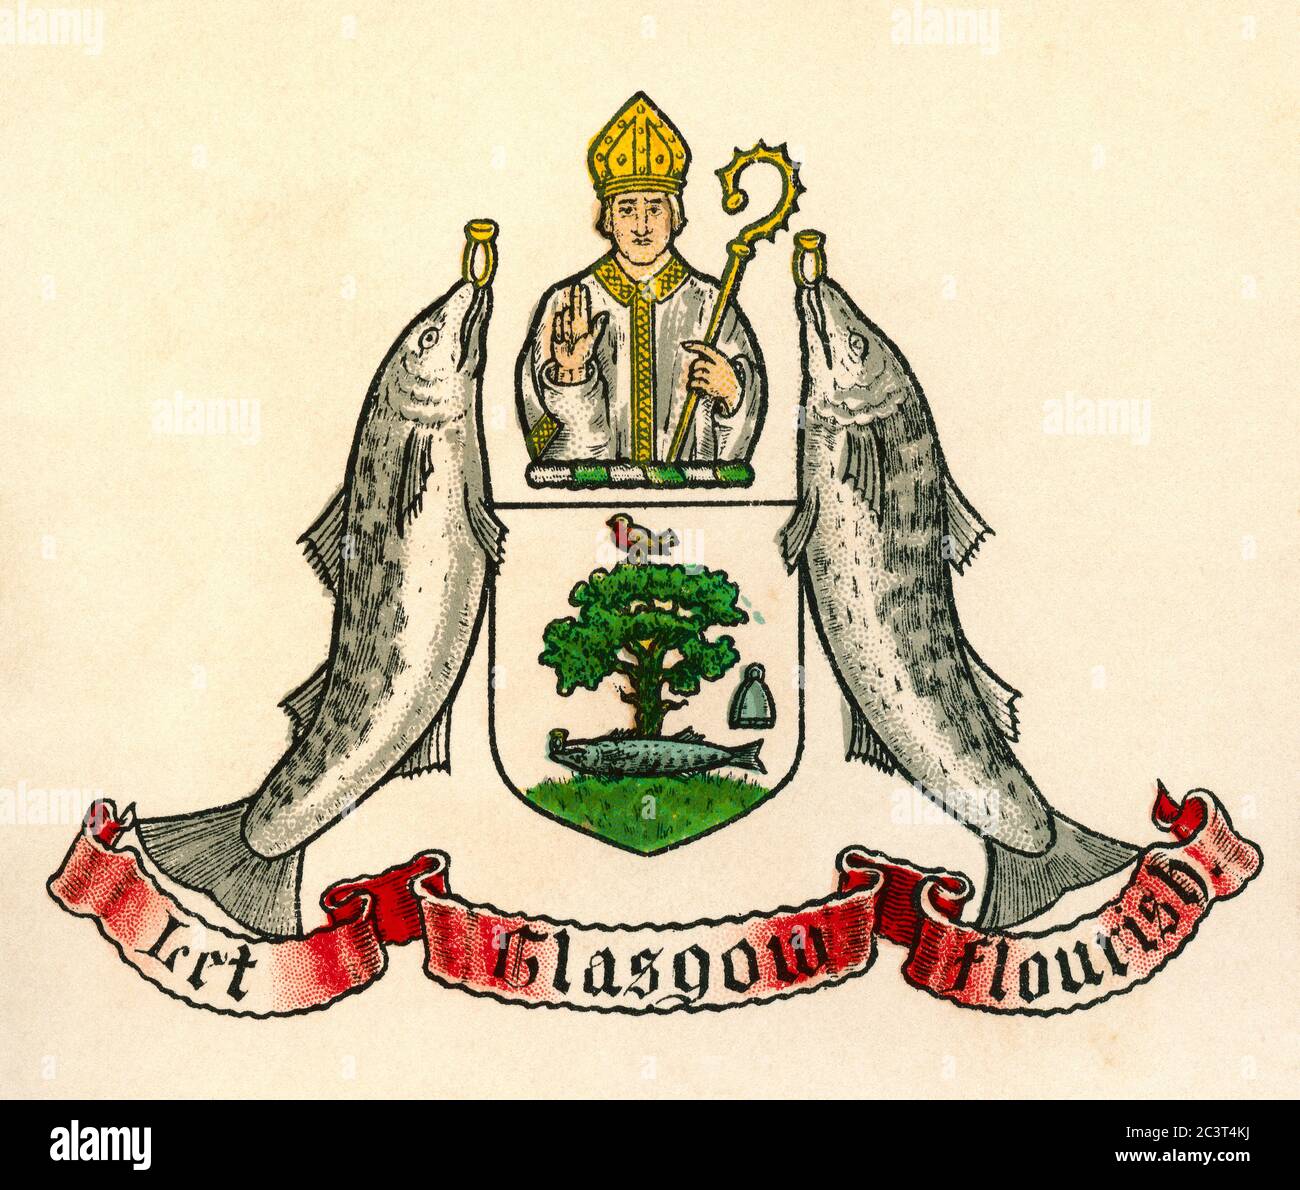 Coat of arms of Glasgow, Scotland. From The Business Encyclopaedia and Legal Adviser, published 1907. Stock Photo